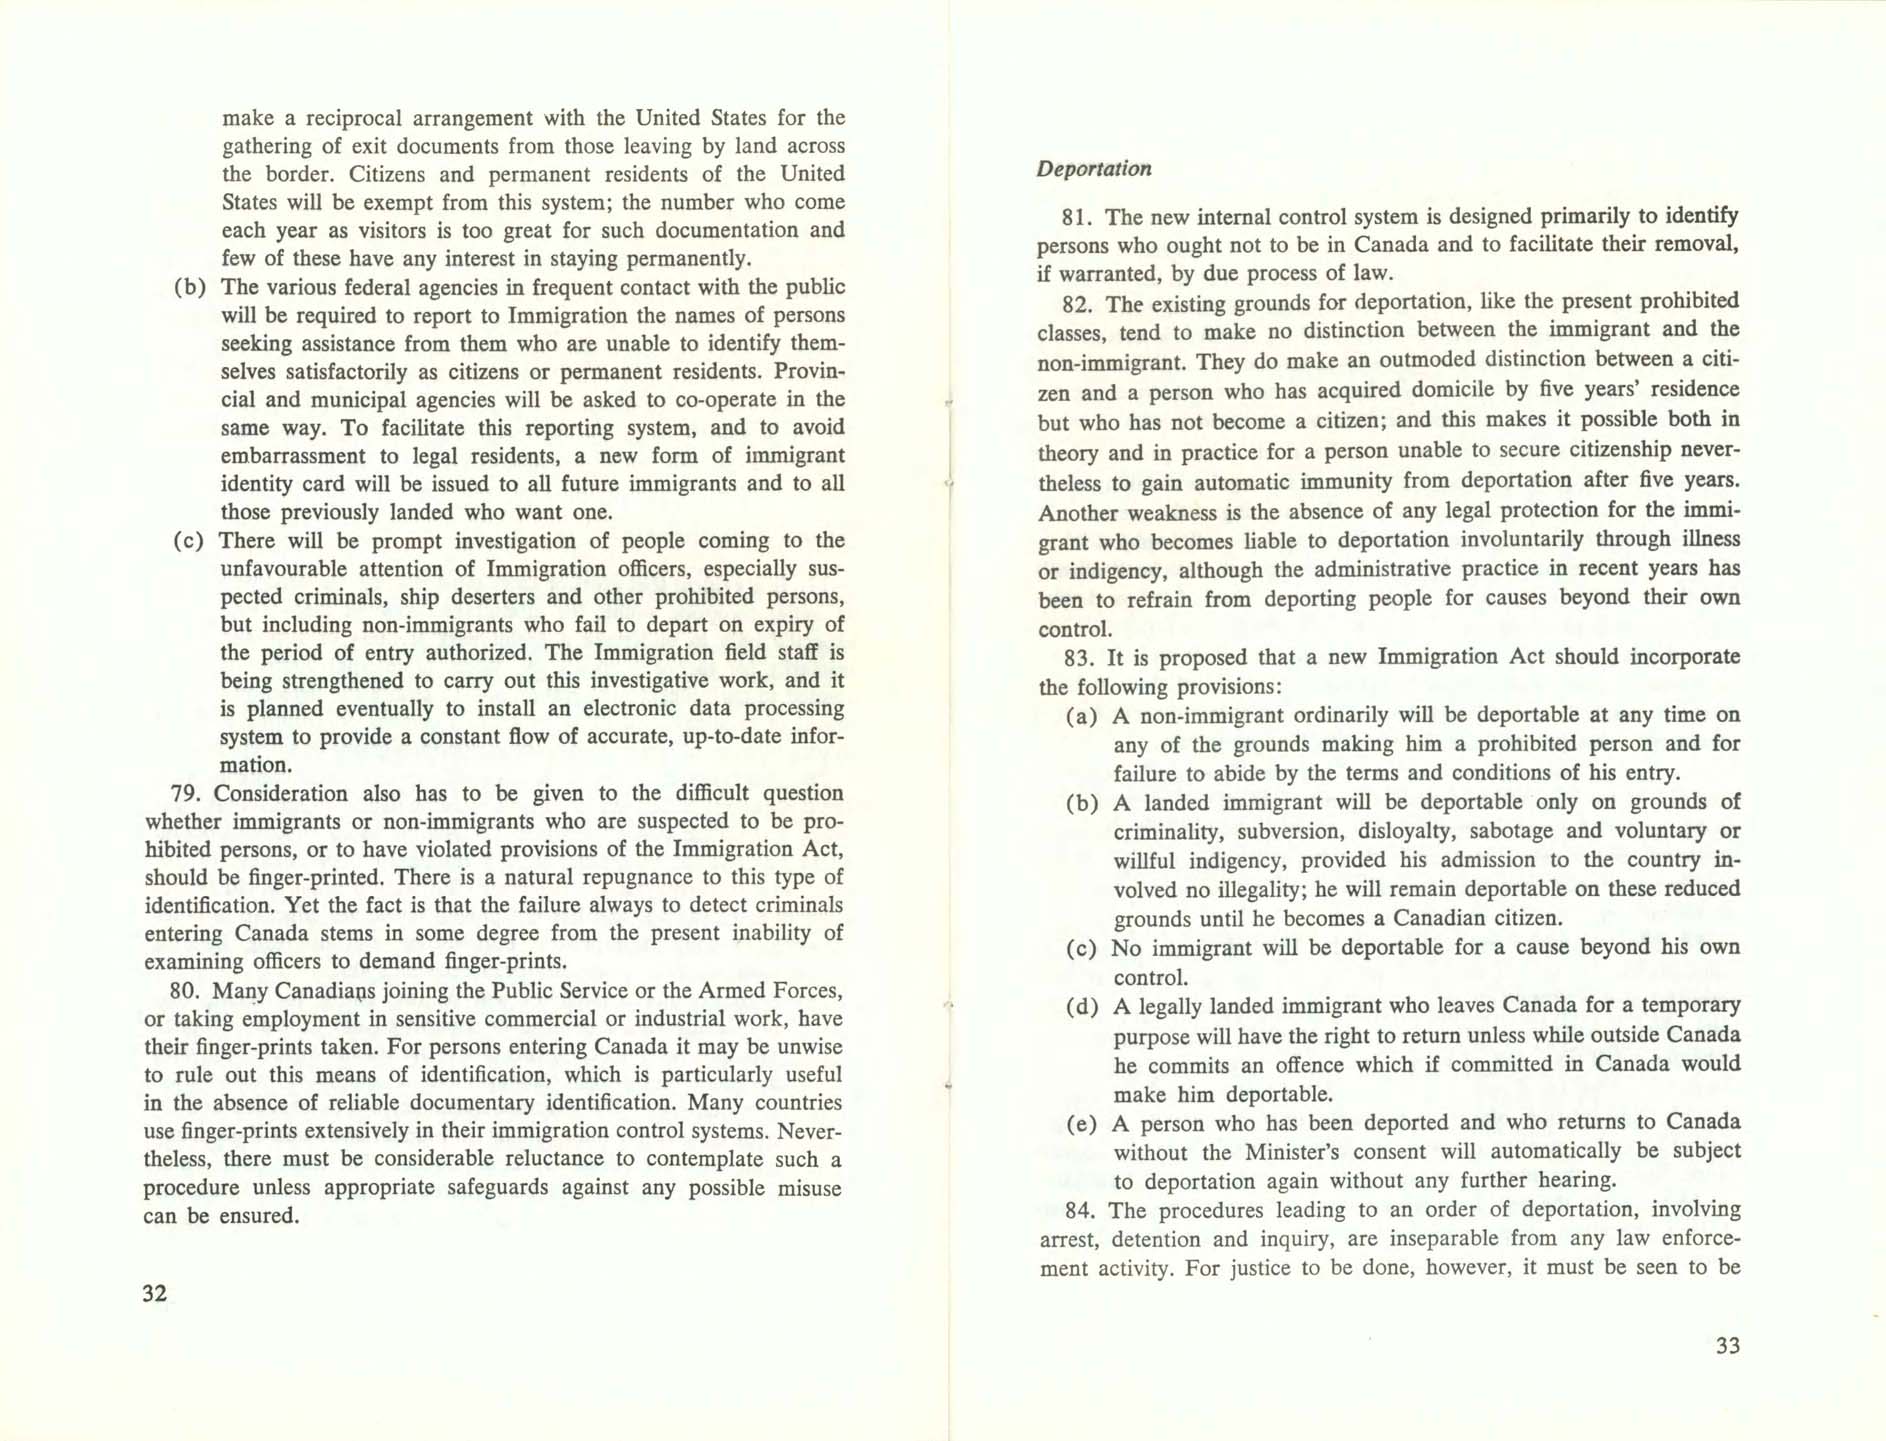 Page 32, 33 White Paper on Immigration, 1966